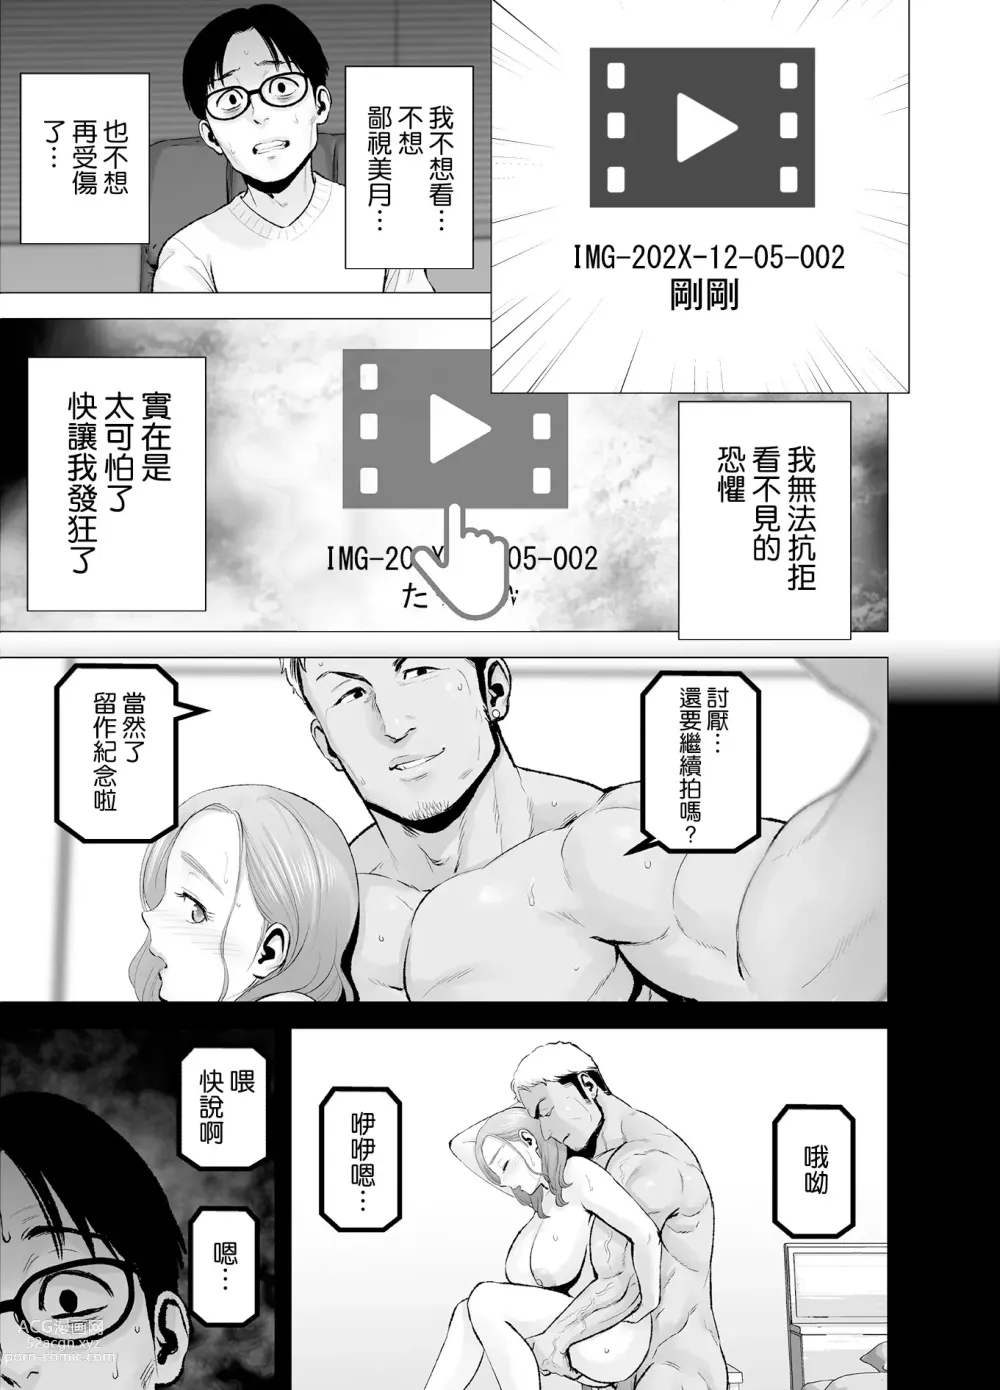 Page 140 of doujinshi Untitled Document 1+2 (decensored)